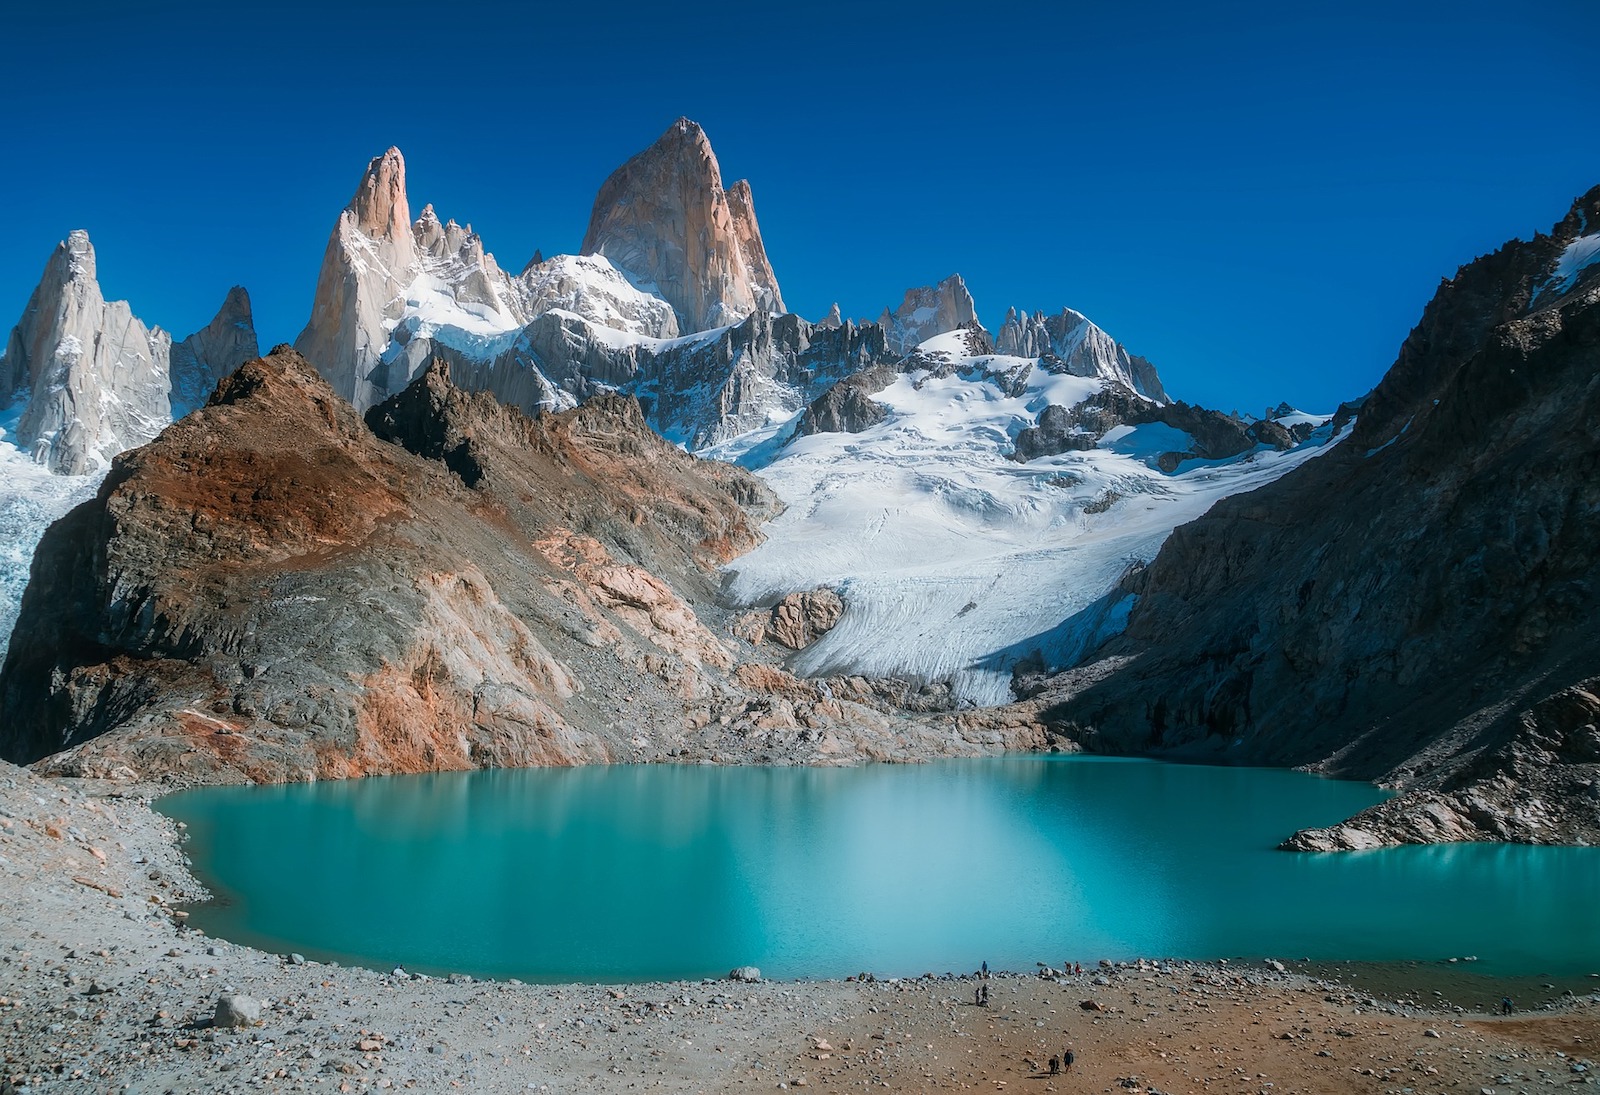 Hiking to the base of Mount Fitz Roy where a shimmering blue lake pans out beneath the granitic spears